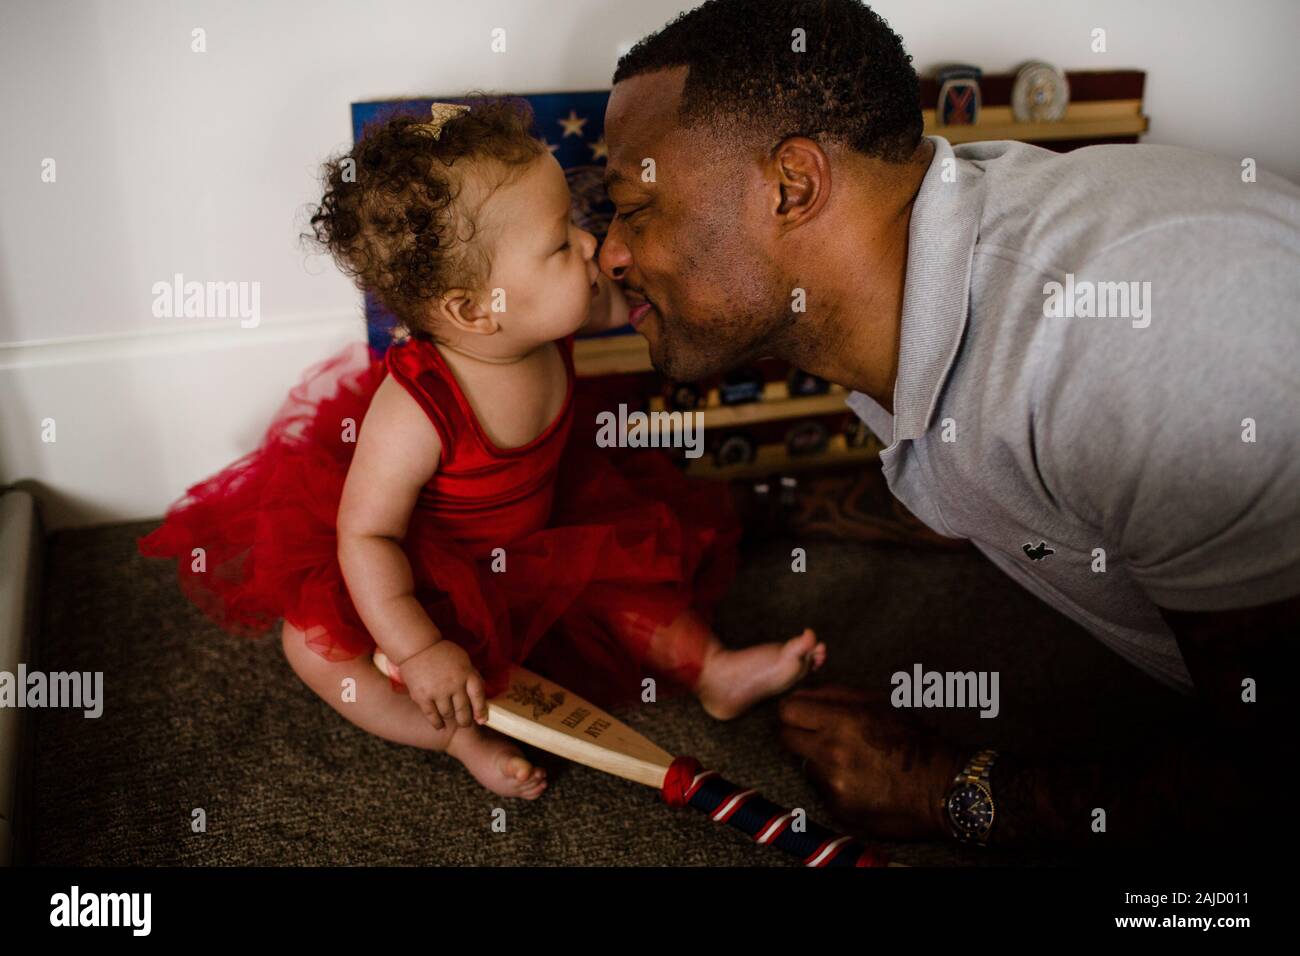 African American Dad Rubbing Noses with Biracial Daughter Stock Photo